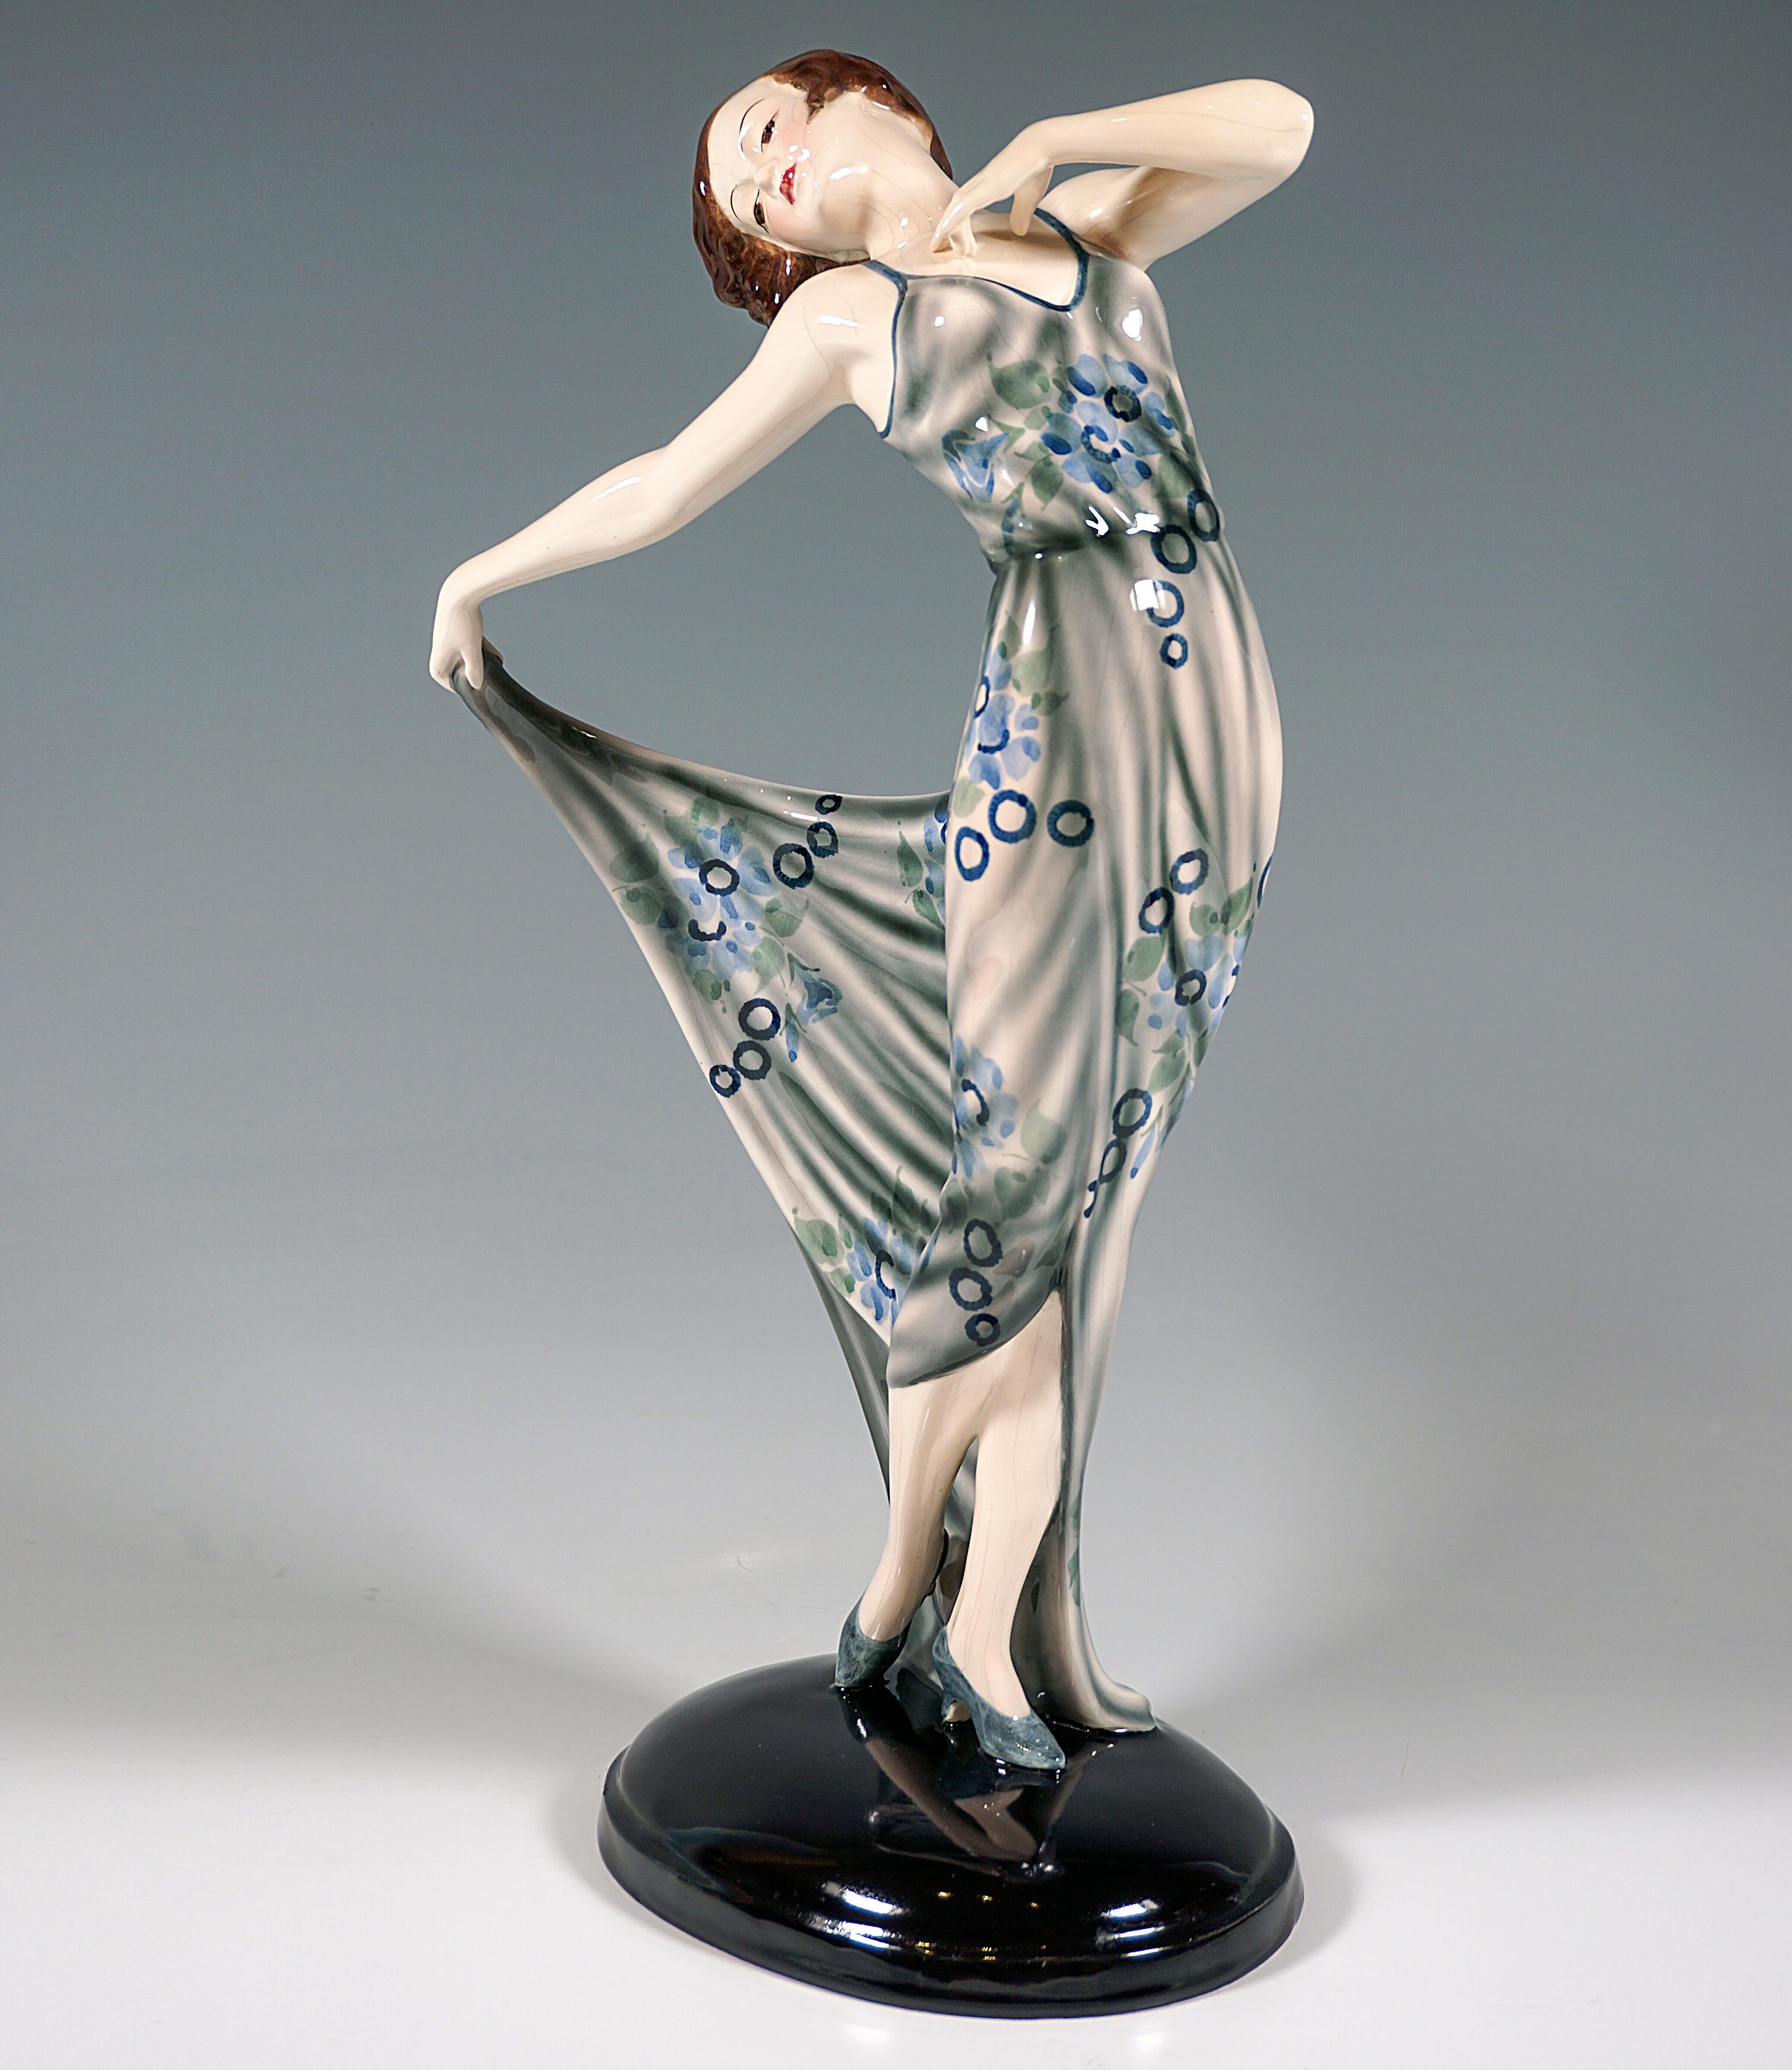 Elegant Goldscheider Art Déco art ceramic figure from the 1930s: 
Dancer with chin-length brunette hair in light gray-blue long dance dress with abstract floral decoration, posing with her upper body turned slightly to the side and leaning